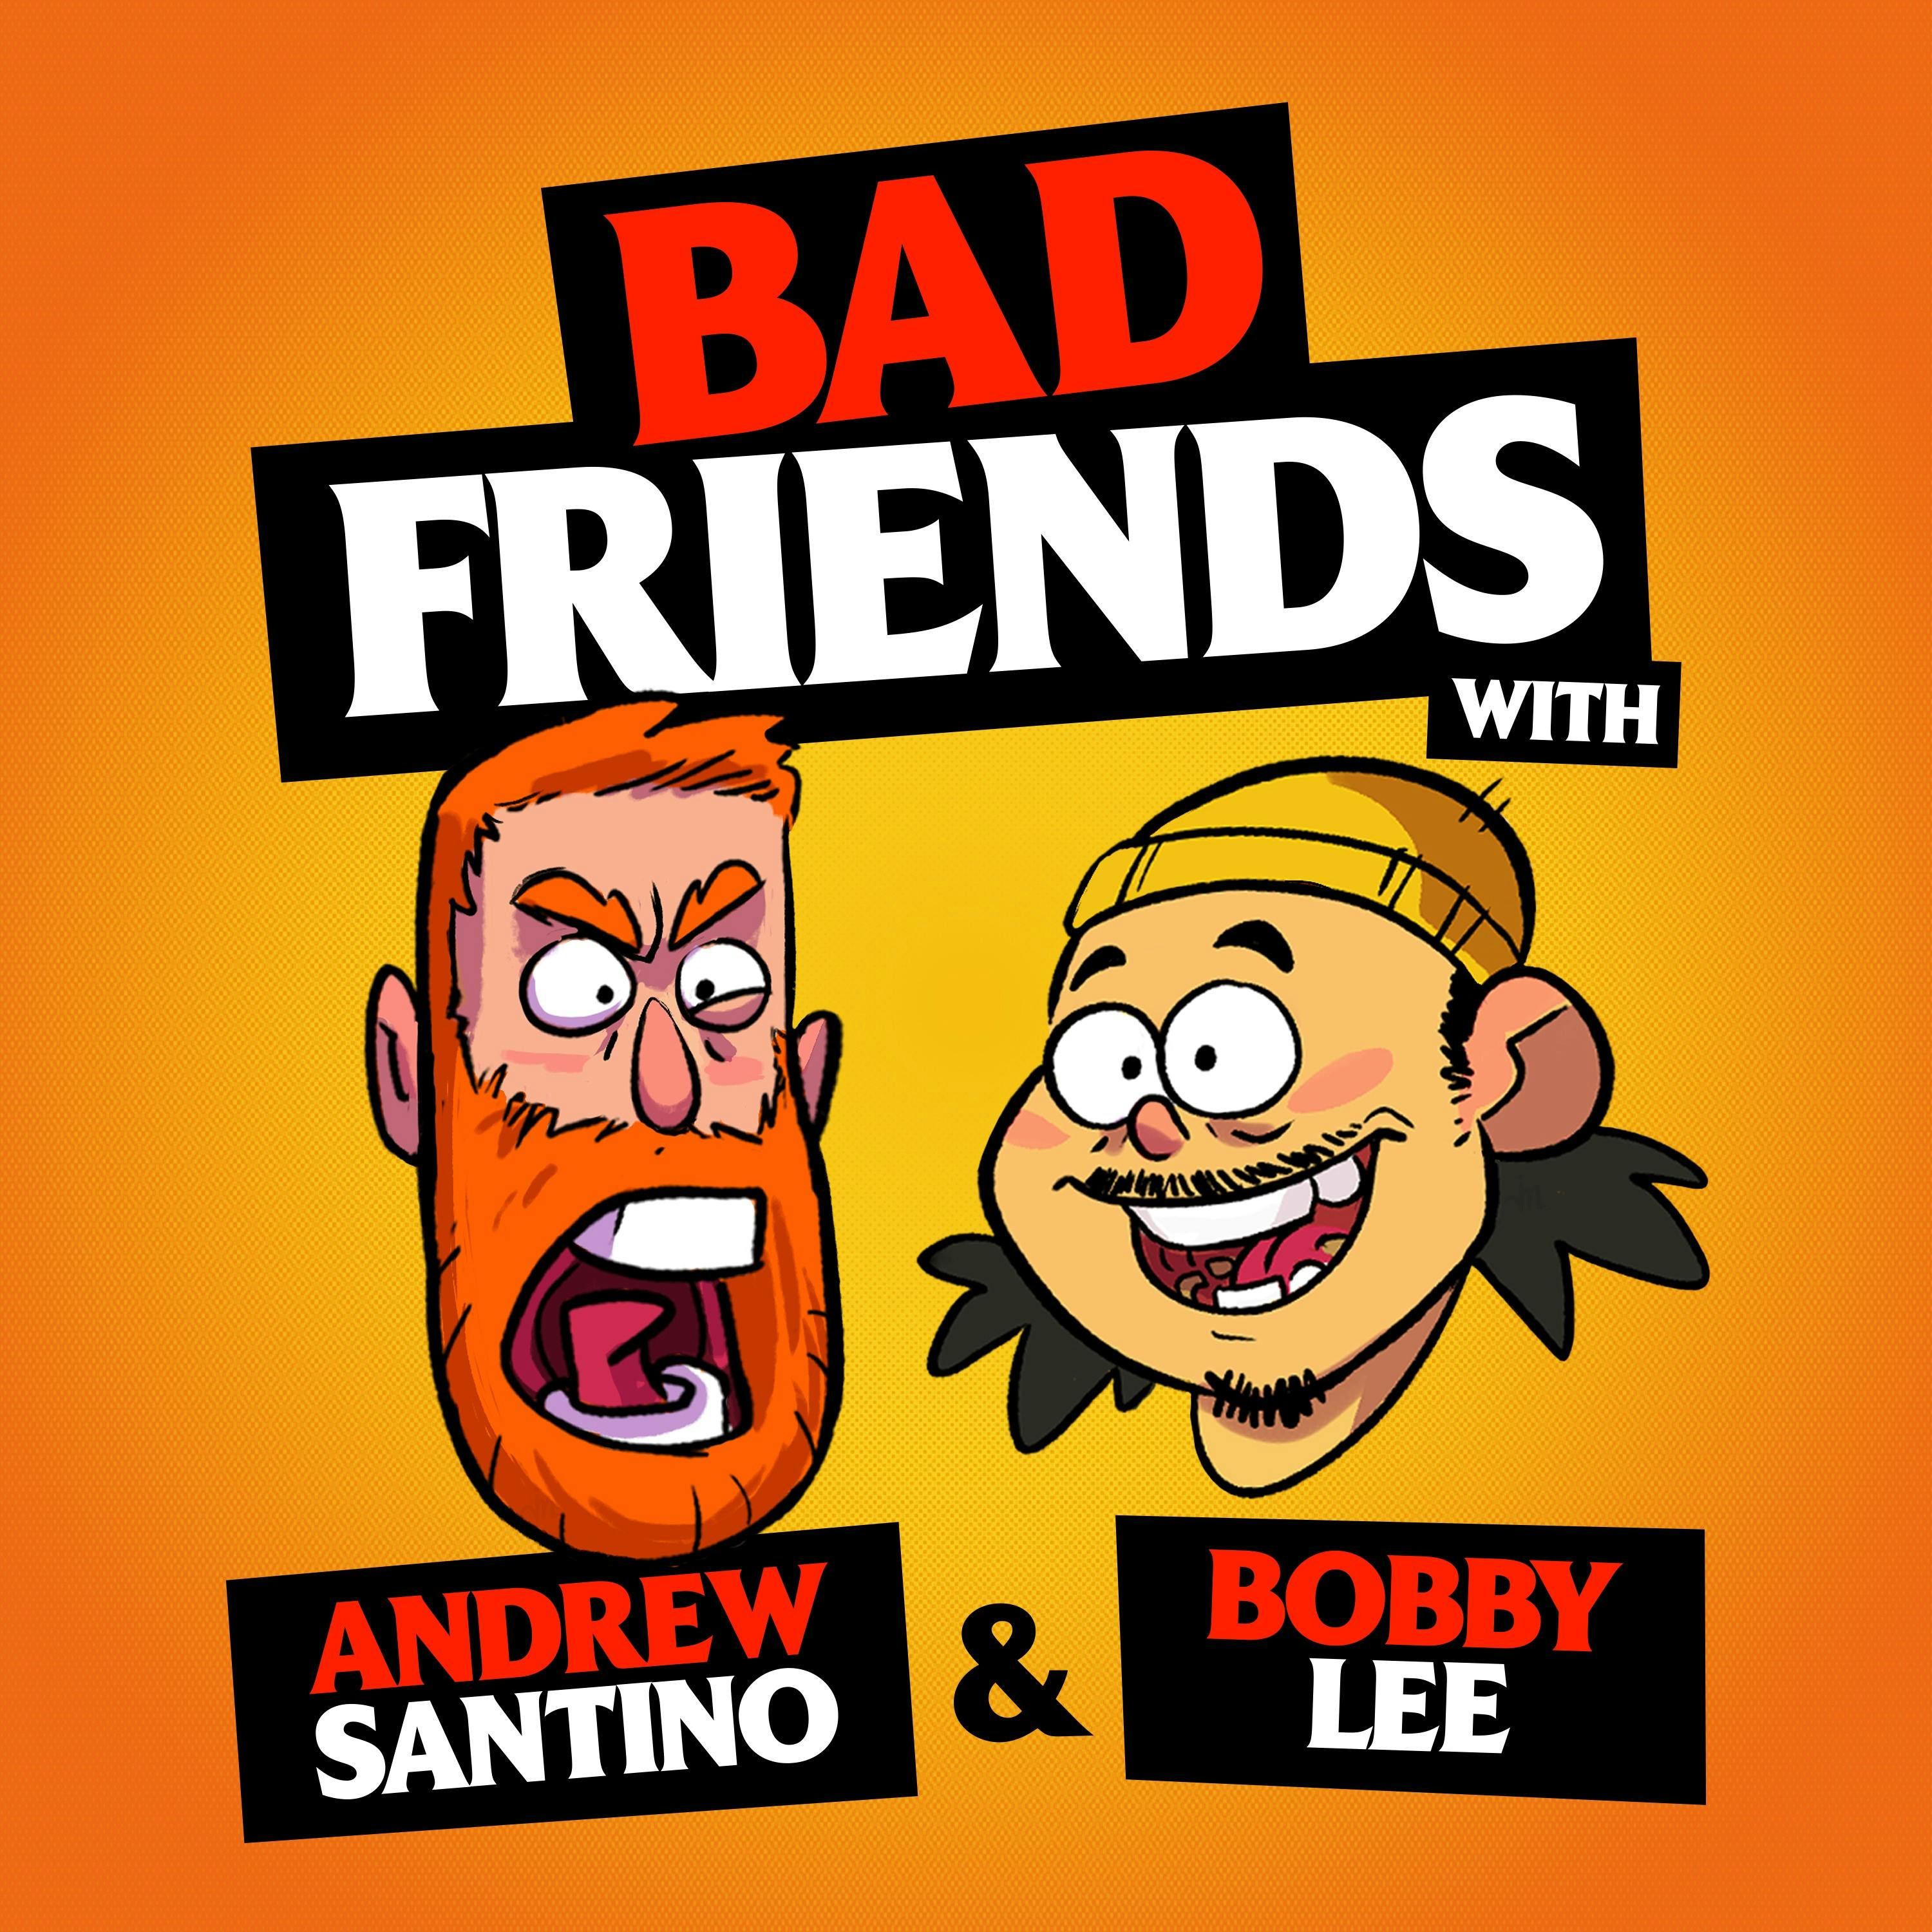 Free Britney & Koreans for Life! by Andrew Santino and Bobby Lee